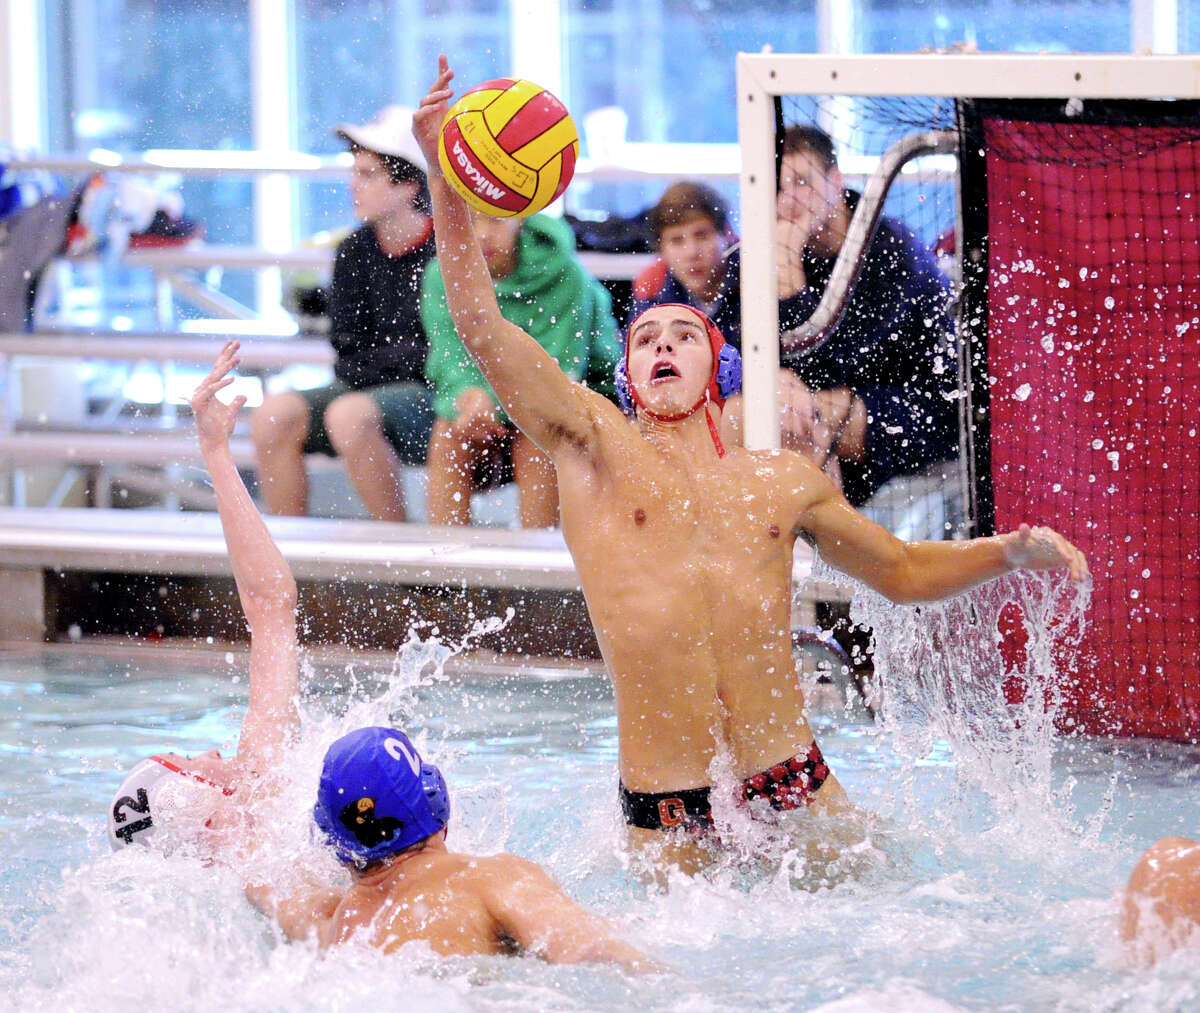 Greenwich High School water polo goalie Steven Michaud grabs a deflected shot in front of the goal as teammate Will Klingner # 2 defends against Thomas Savage # 12 of Lawrenceville during the Cardinal Water Polo tournament at Greenwich High School, Saturday afternoon, Oct. 13, 2012.